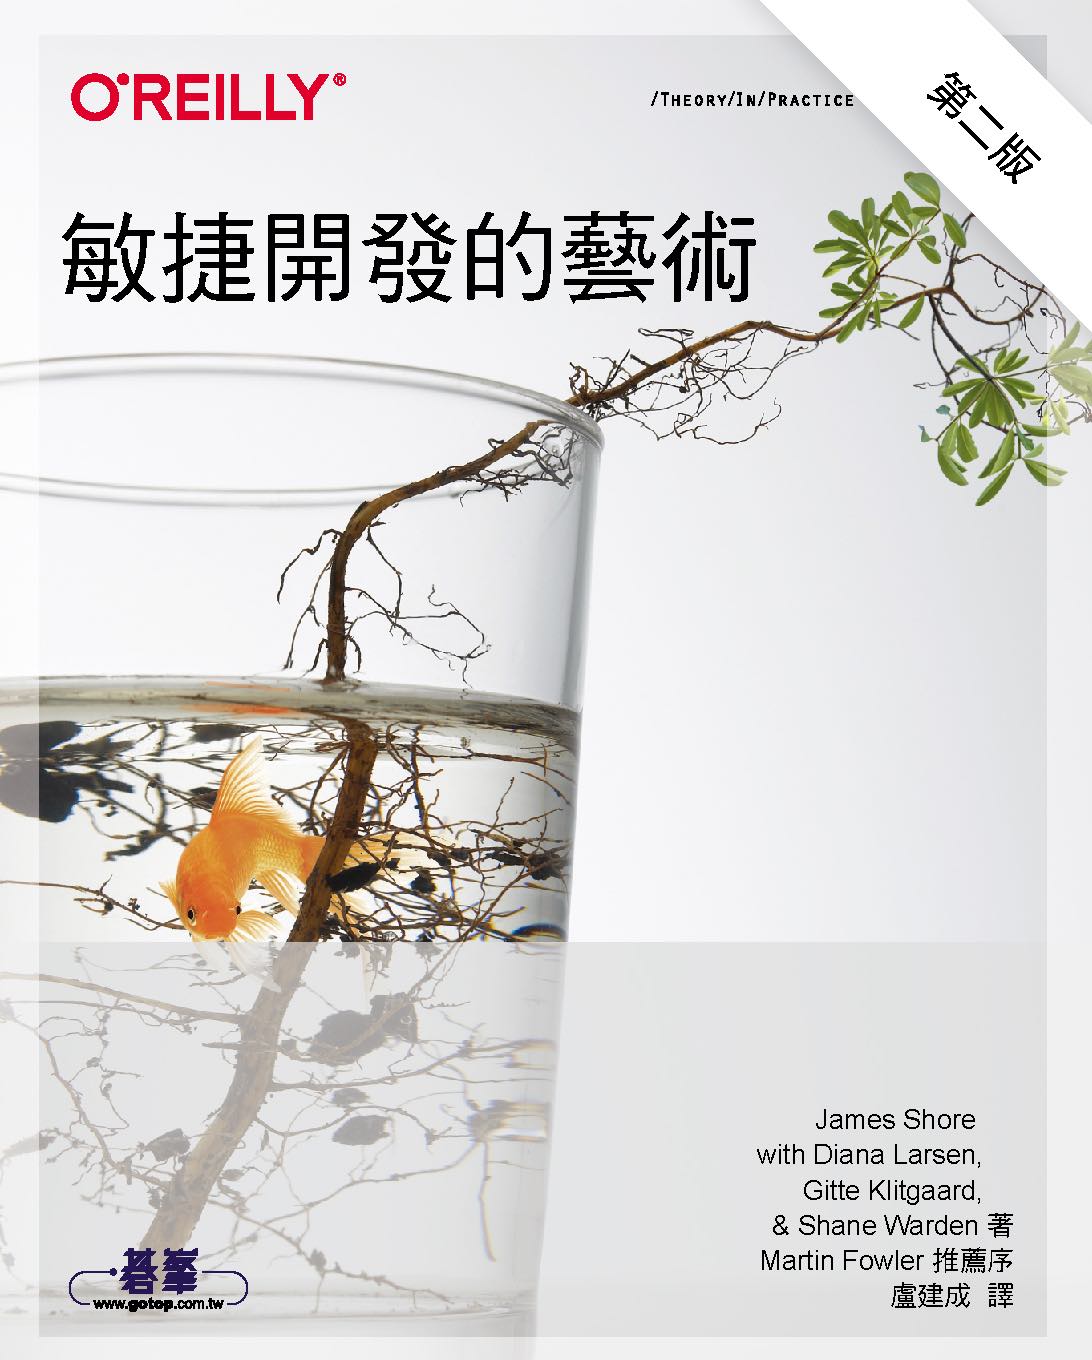 Book cover for the traditional Chinese translation of “The Art of Agile Development, Second Edition” by James Shore. The title reads, “敏捷開發的藝術”. It’s translated by 盧建成 and published by 蓉舝 (www.gotop.com.tw). Other than translated text, the cover is the same as the English edition, showing a water glass containing a goldfish and a small sapling with green leaves.